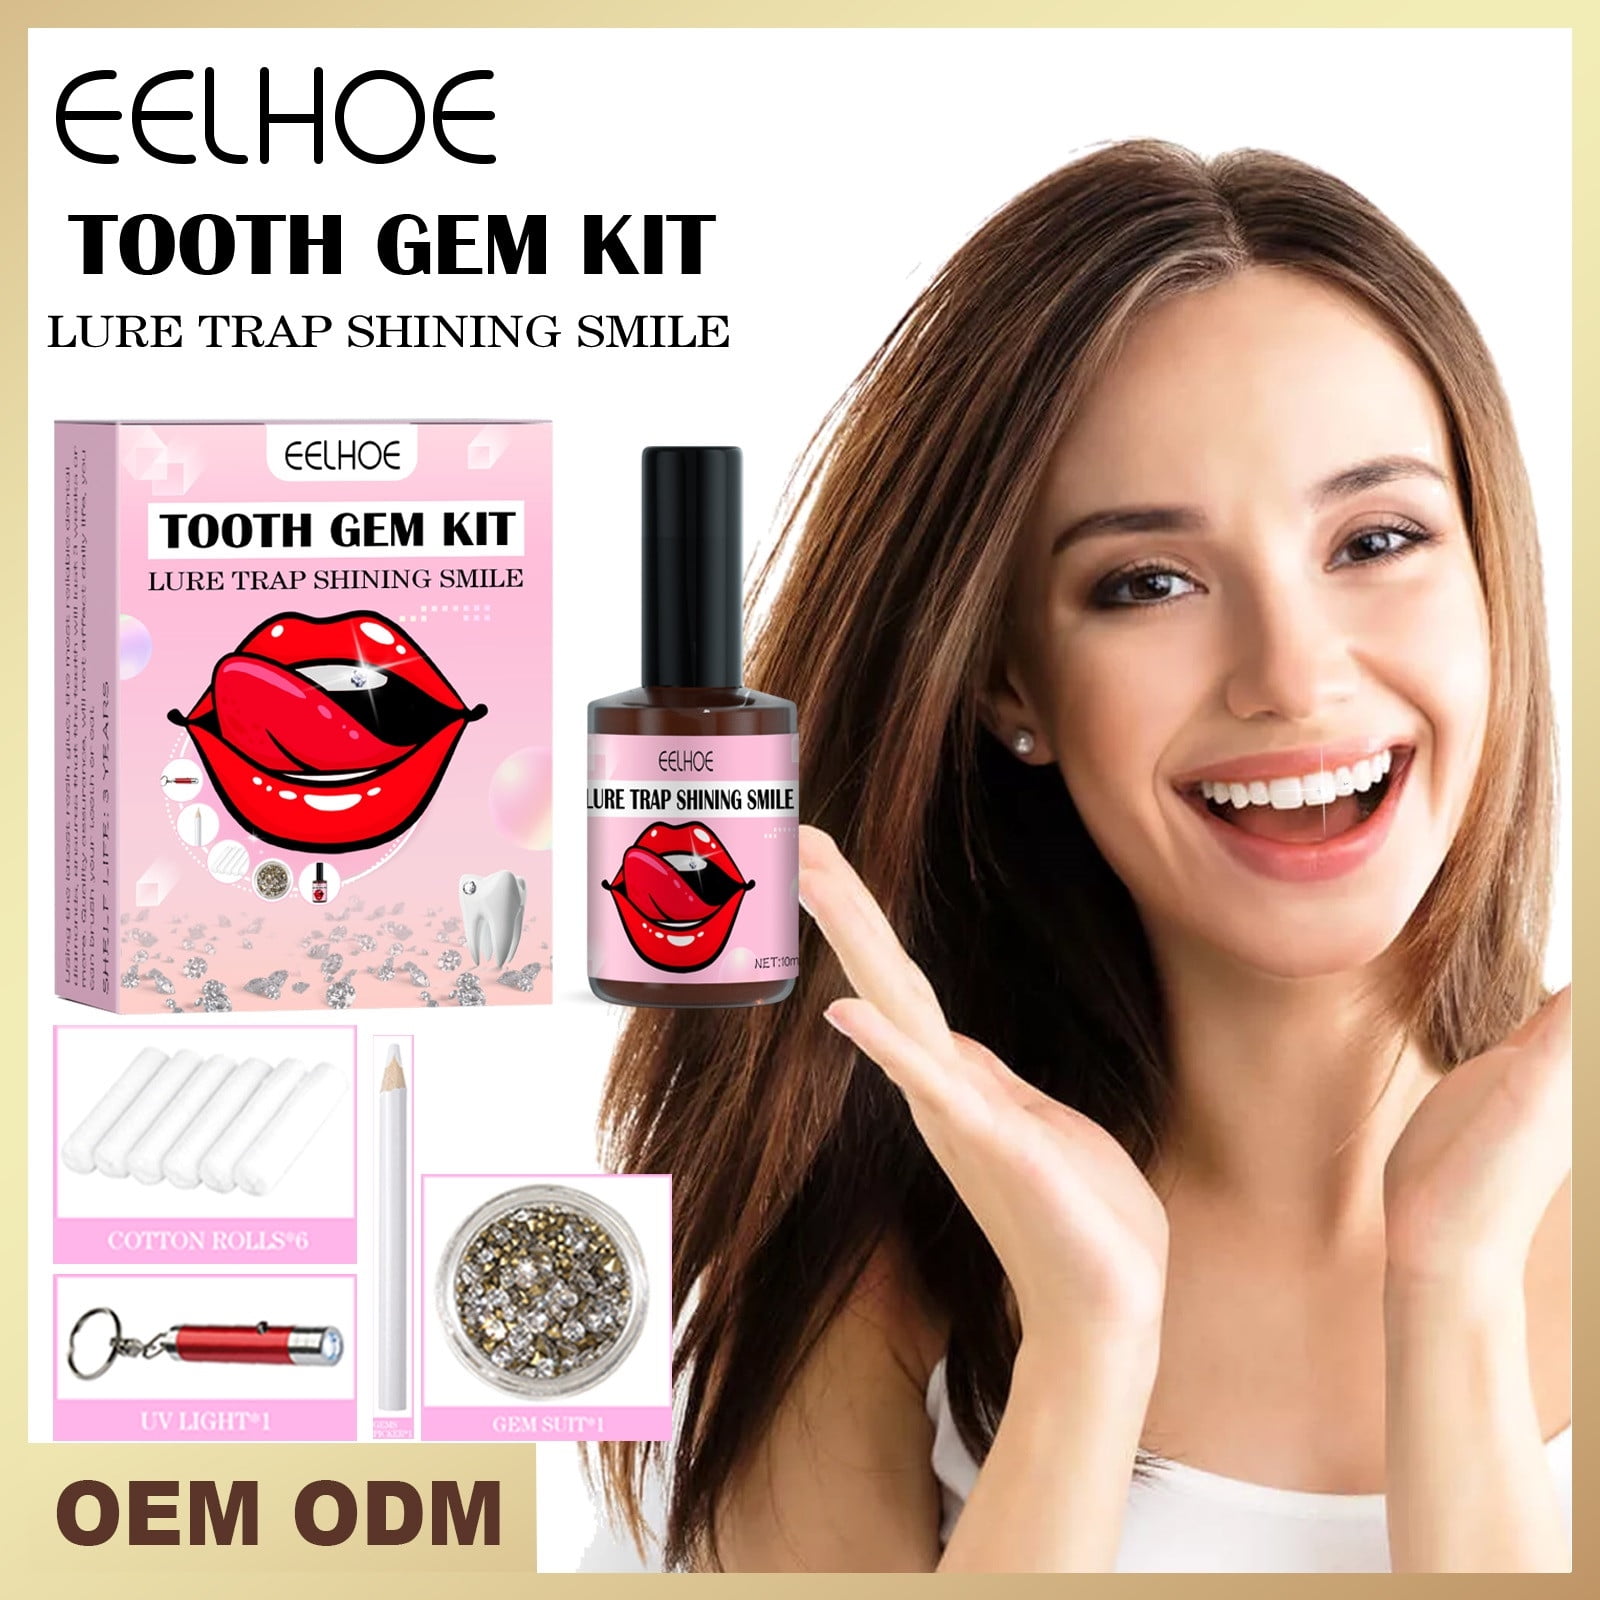 Tooth Gem Kit, Teeth Jewelry Kit, Diy Teeth Crystal Kit With Glue And Light  Crystal Ornaments Teeth Decoration Free Shipping